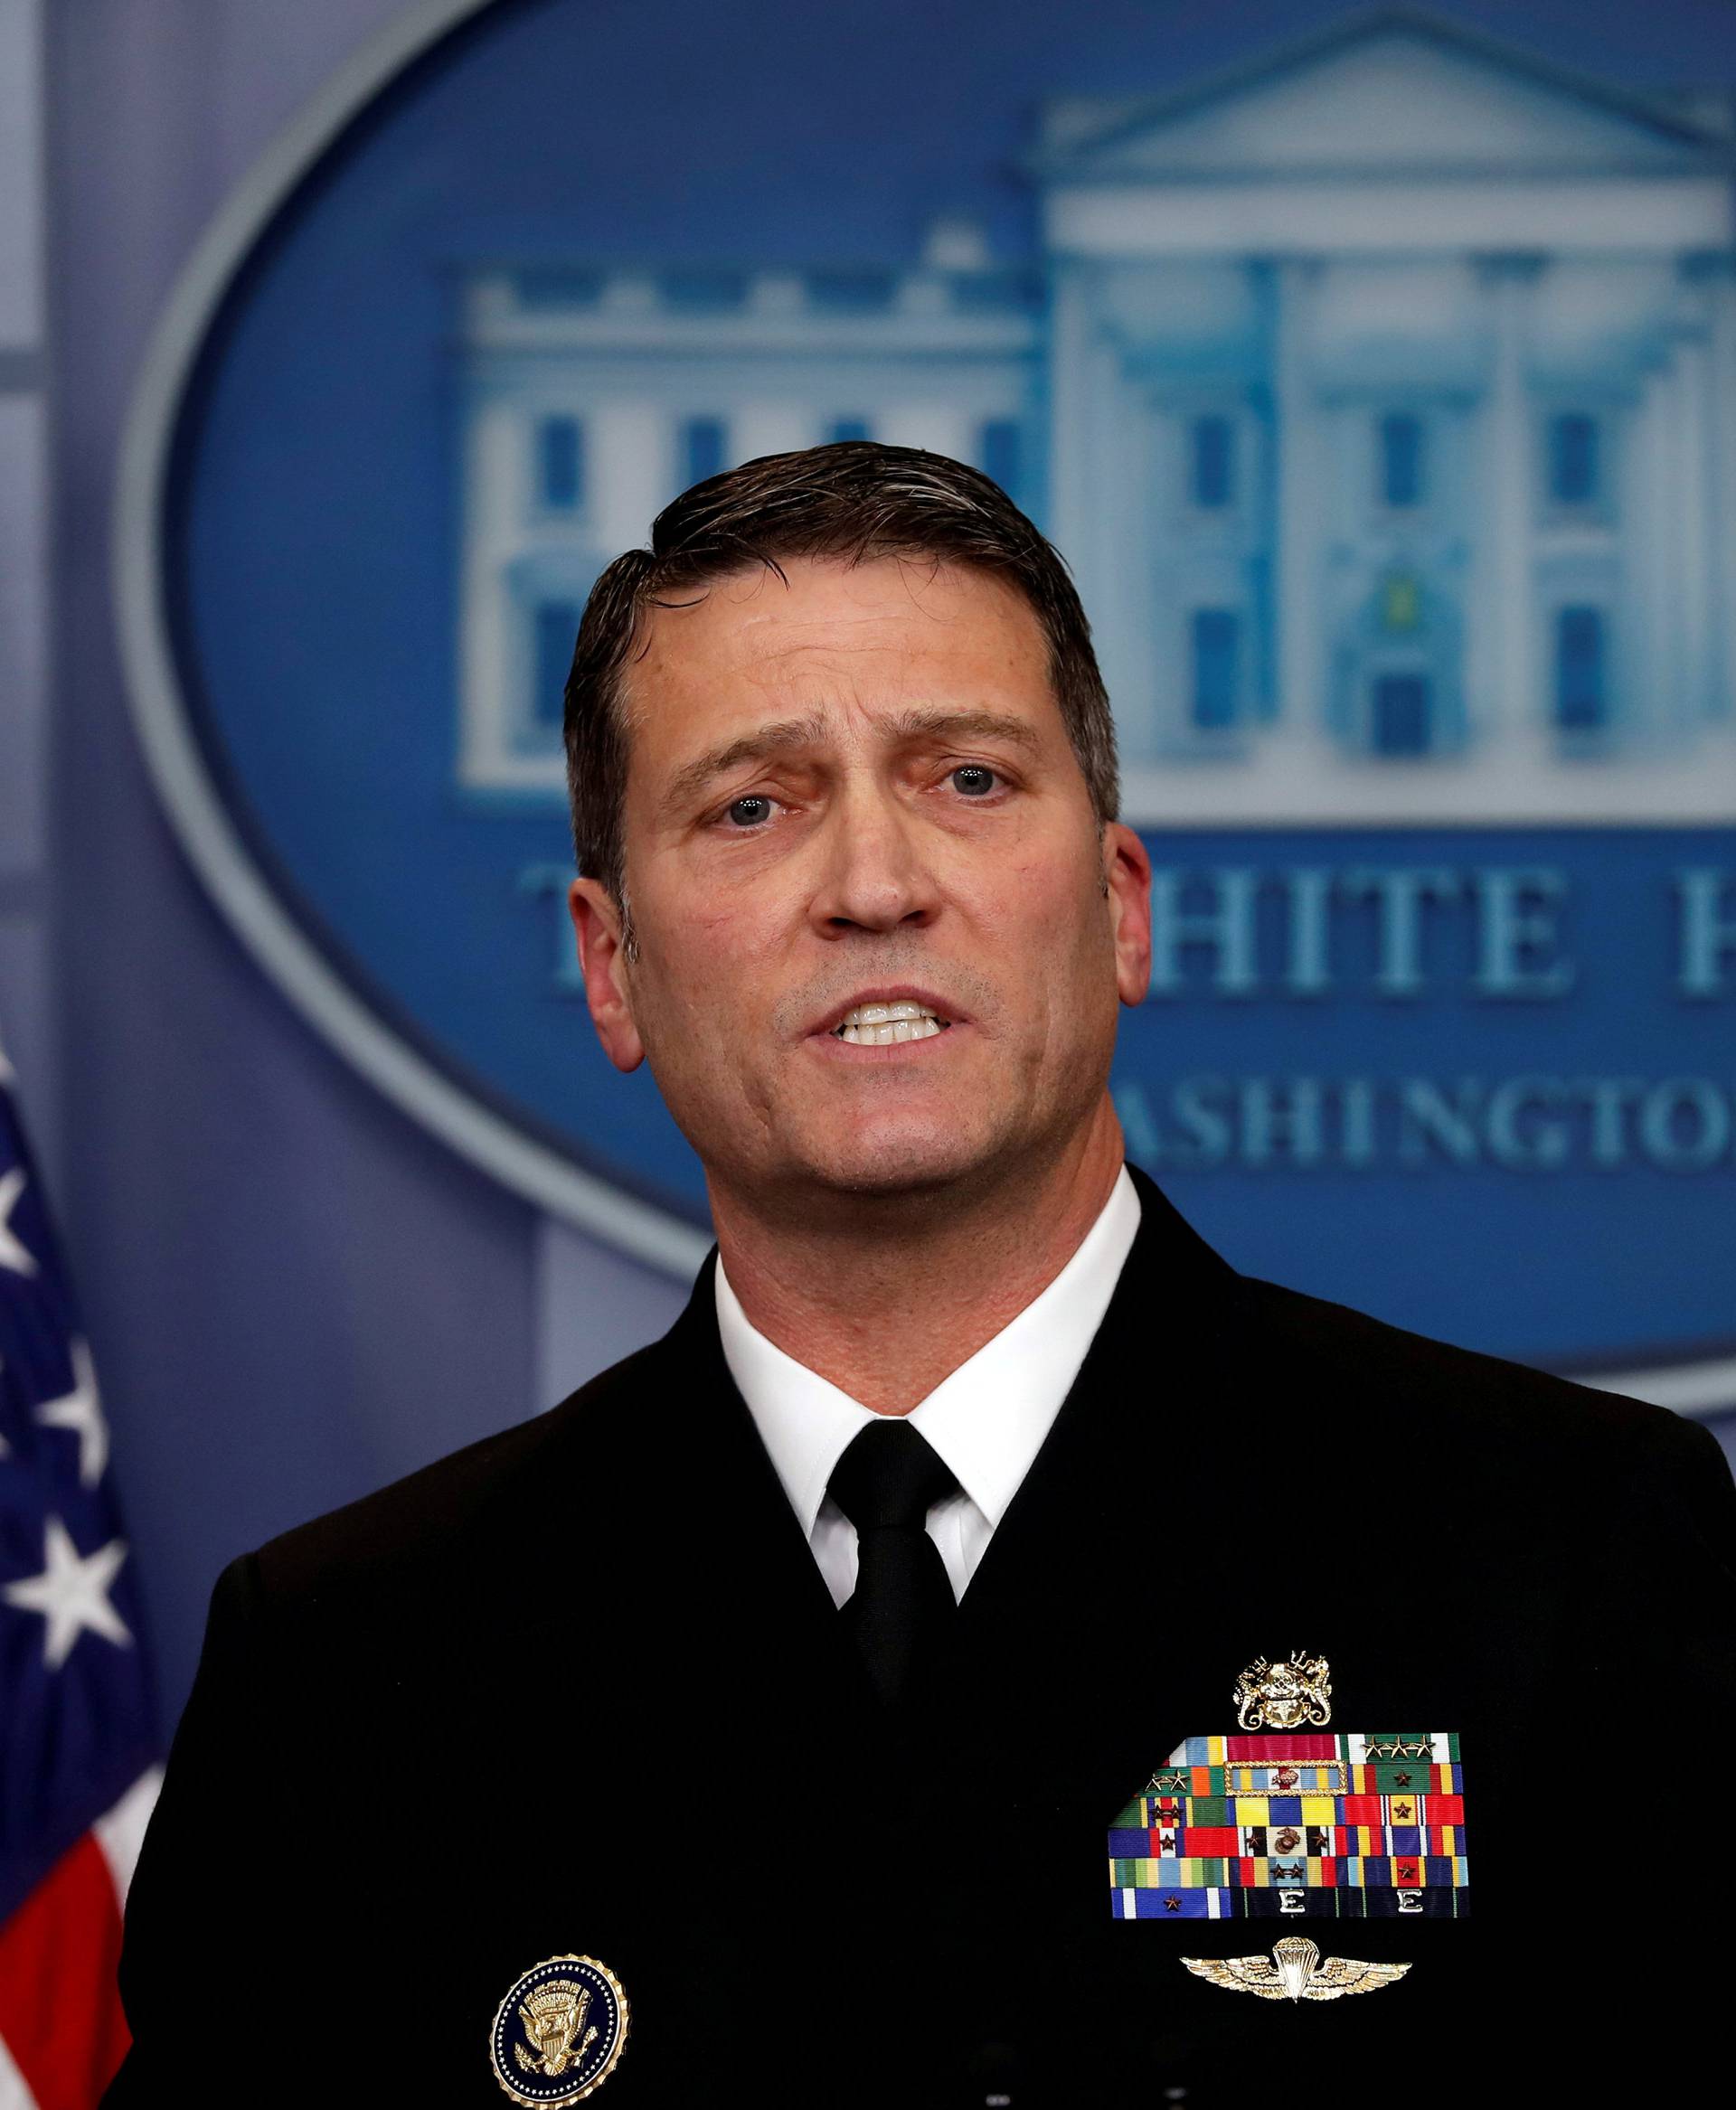 FILE PHOTO: White House, Presidential physician Ronny Jackson answers question about U.S. President Donald Trump's health after the president's annual physical at the White House in Washington